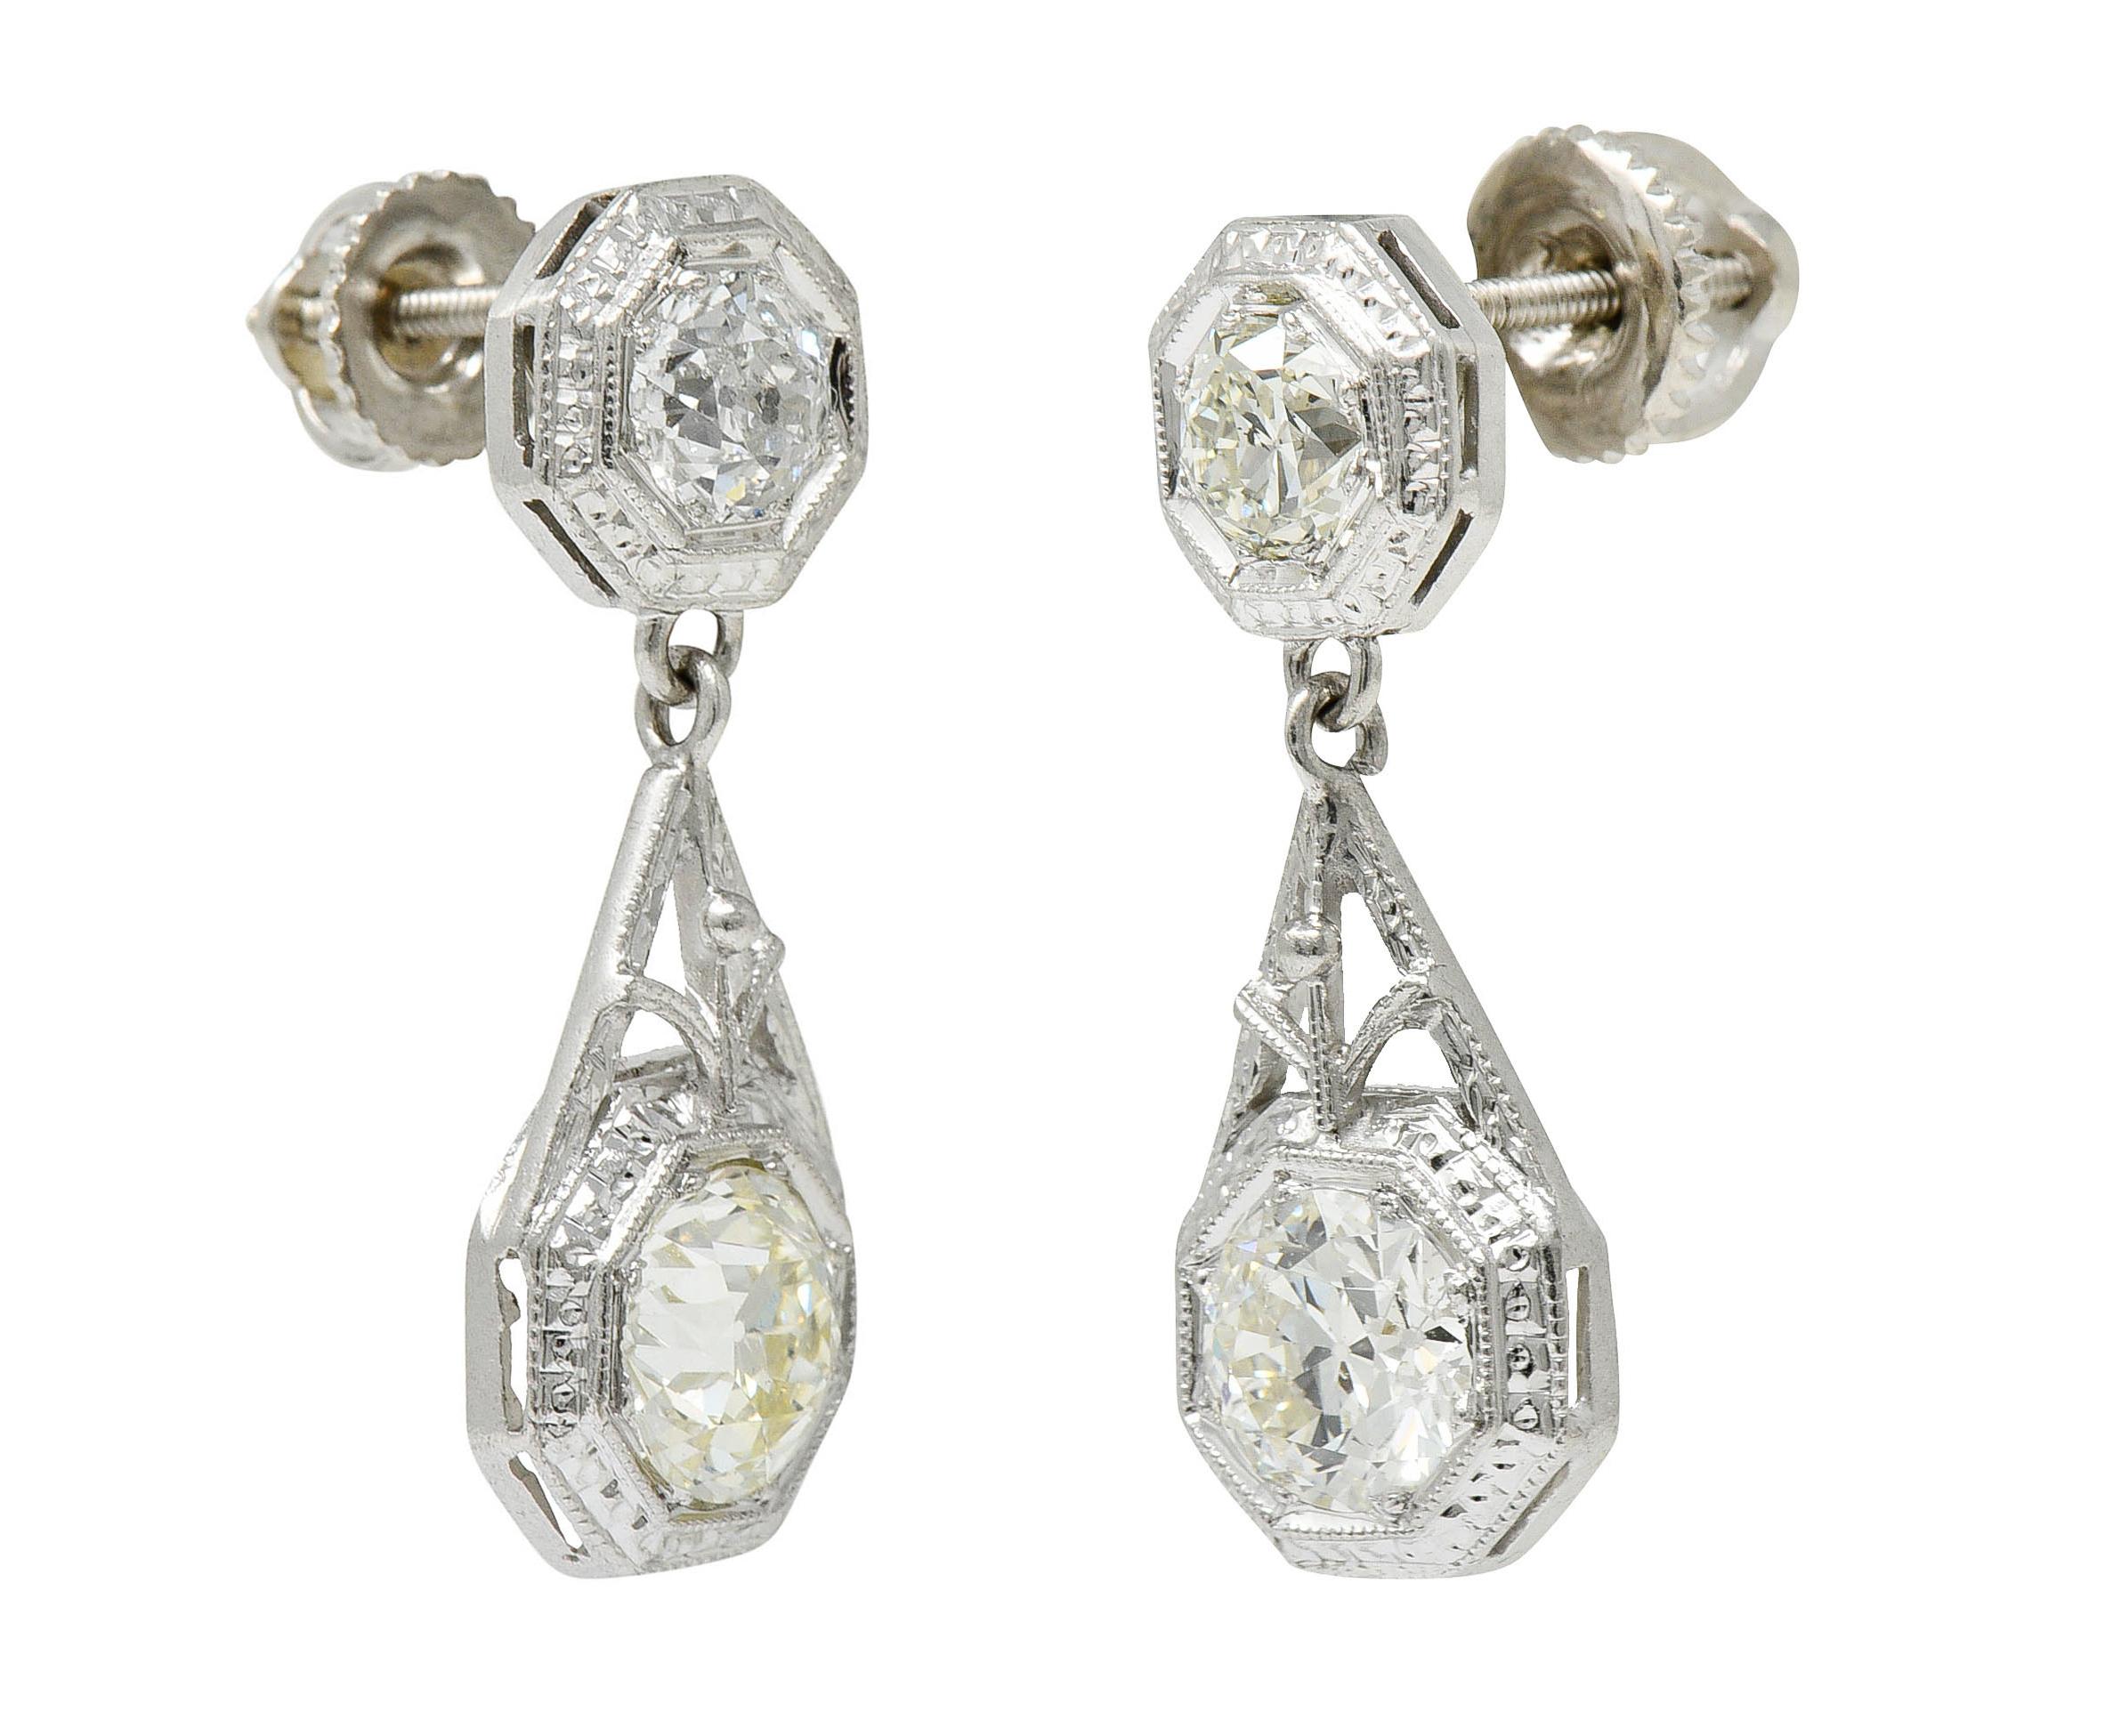 Earrings are designed with an octagonal surmount suspending a larger octagonal drop

Forms are deeply engraved and are accented by milgrain

Surmounts are set with two old European cut diamonds weighing in total approximately 0.90 carat

One